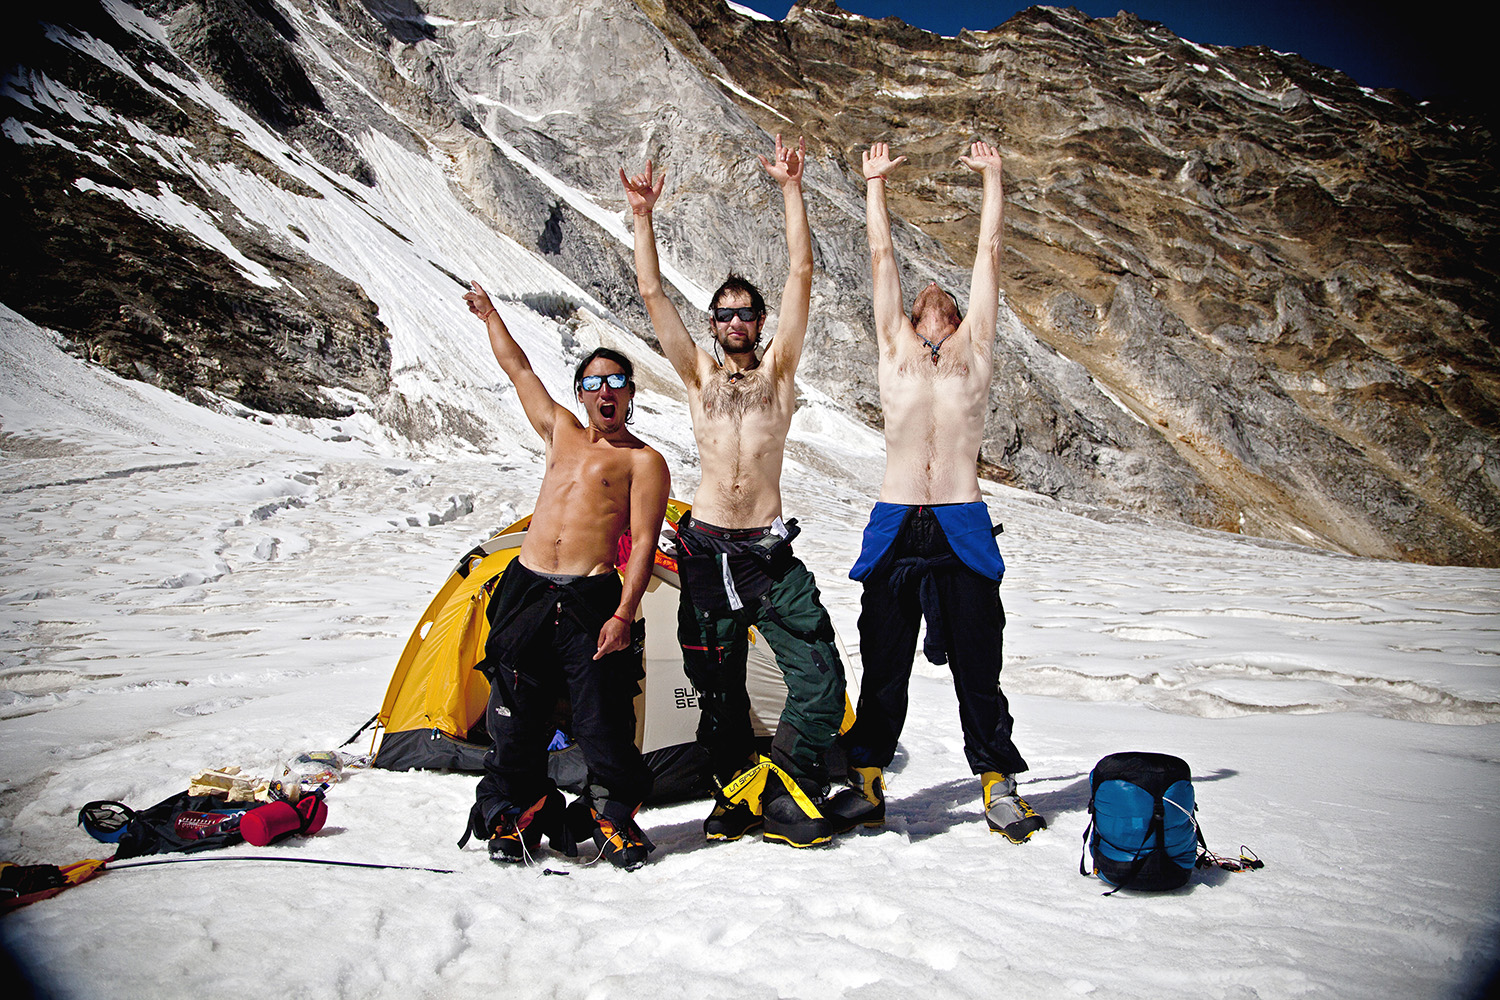 Jimmy Chin, Renan Ozturk and Conrad Anker rejoice after 12 days on the route. The descent is often the most dangerous part of climb. After two days of rappelling through severely overhanging rock, down rock strafed gullies and the final lower alpine ice wall, the team is finally able to take in their accomplishment.